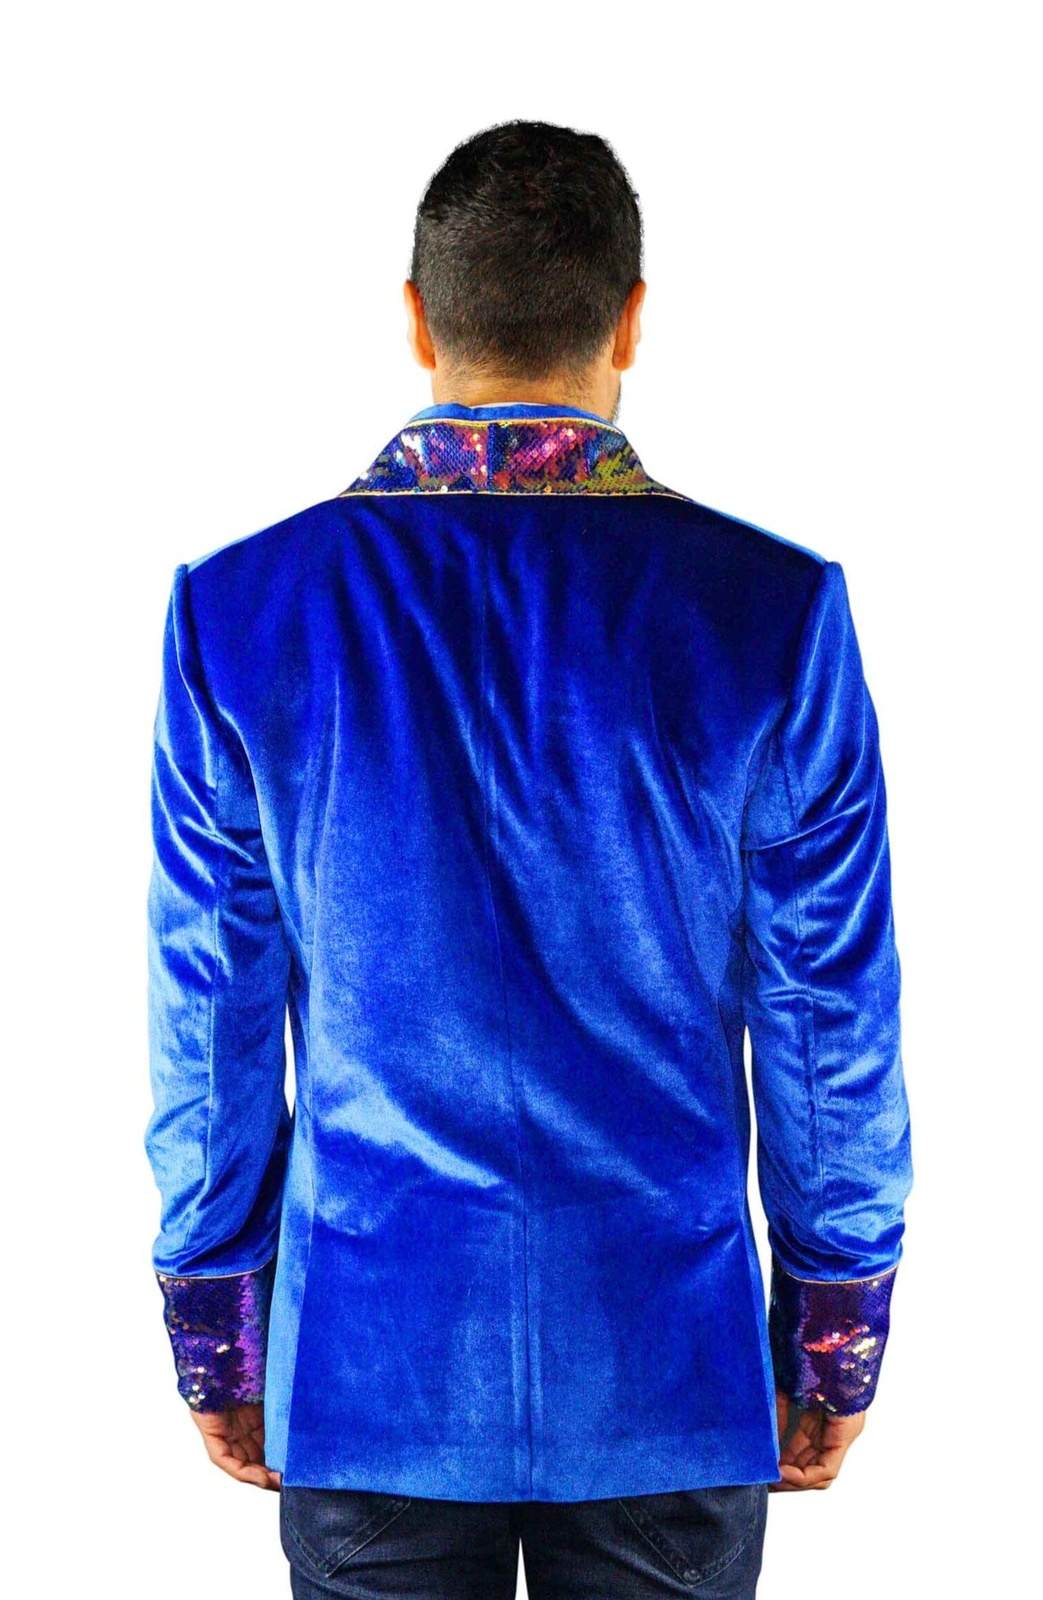 Mens blue velvet smoking jacket with iridescent gold sequins by Love Khaos Festival Wear Brand